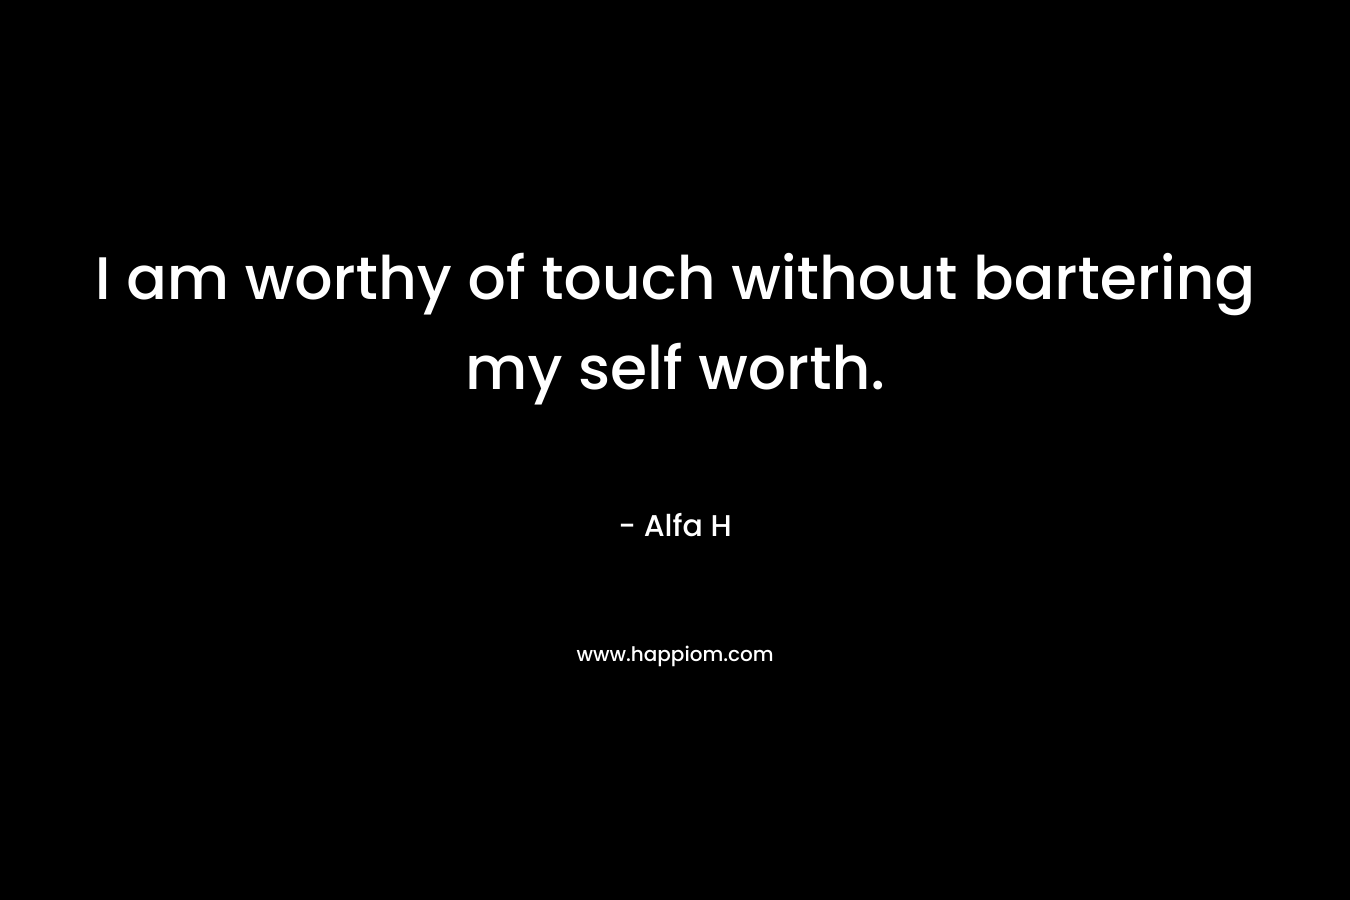 I am worthy of touch without bartering my self worth.